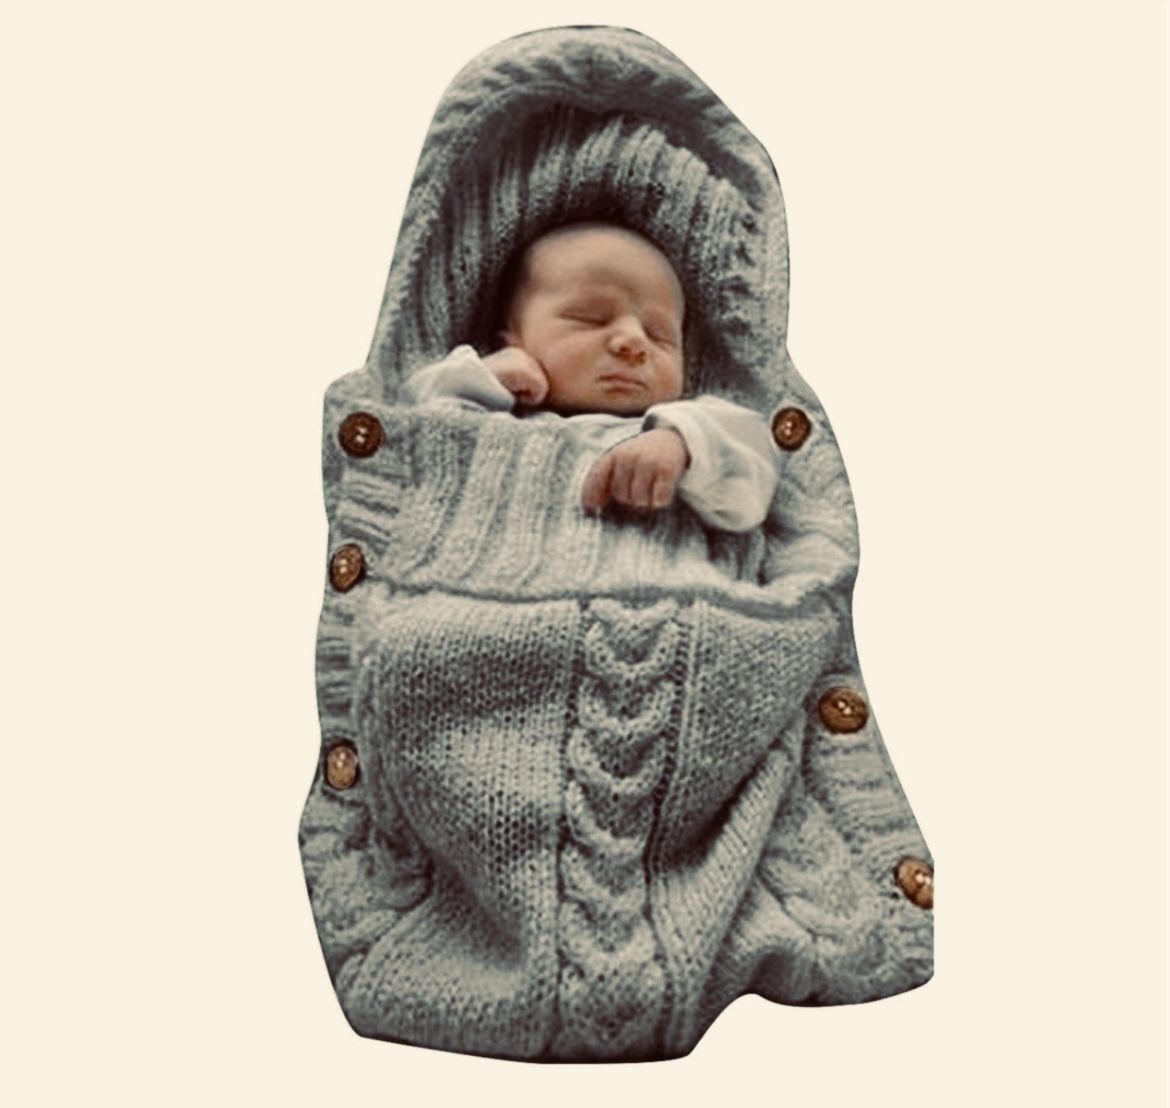 Adorable Unisex Knitted Baby Blanket Sack with Hood